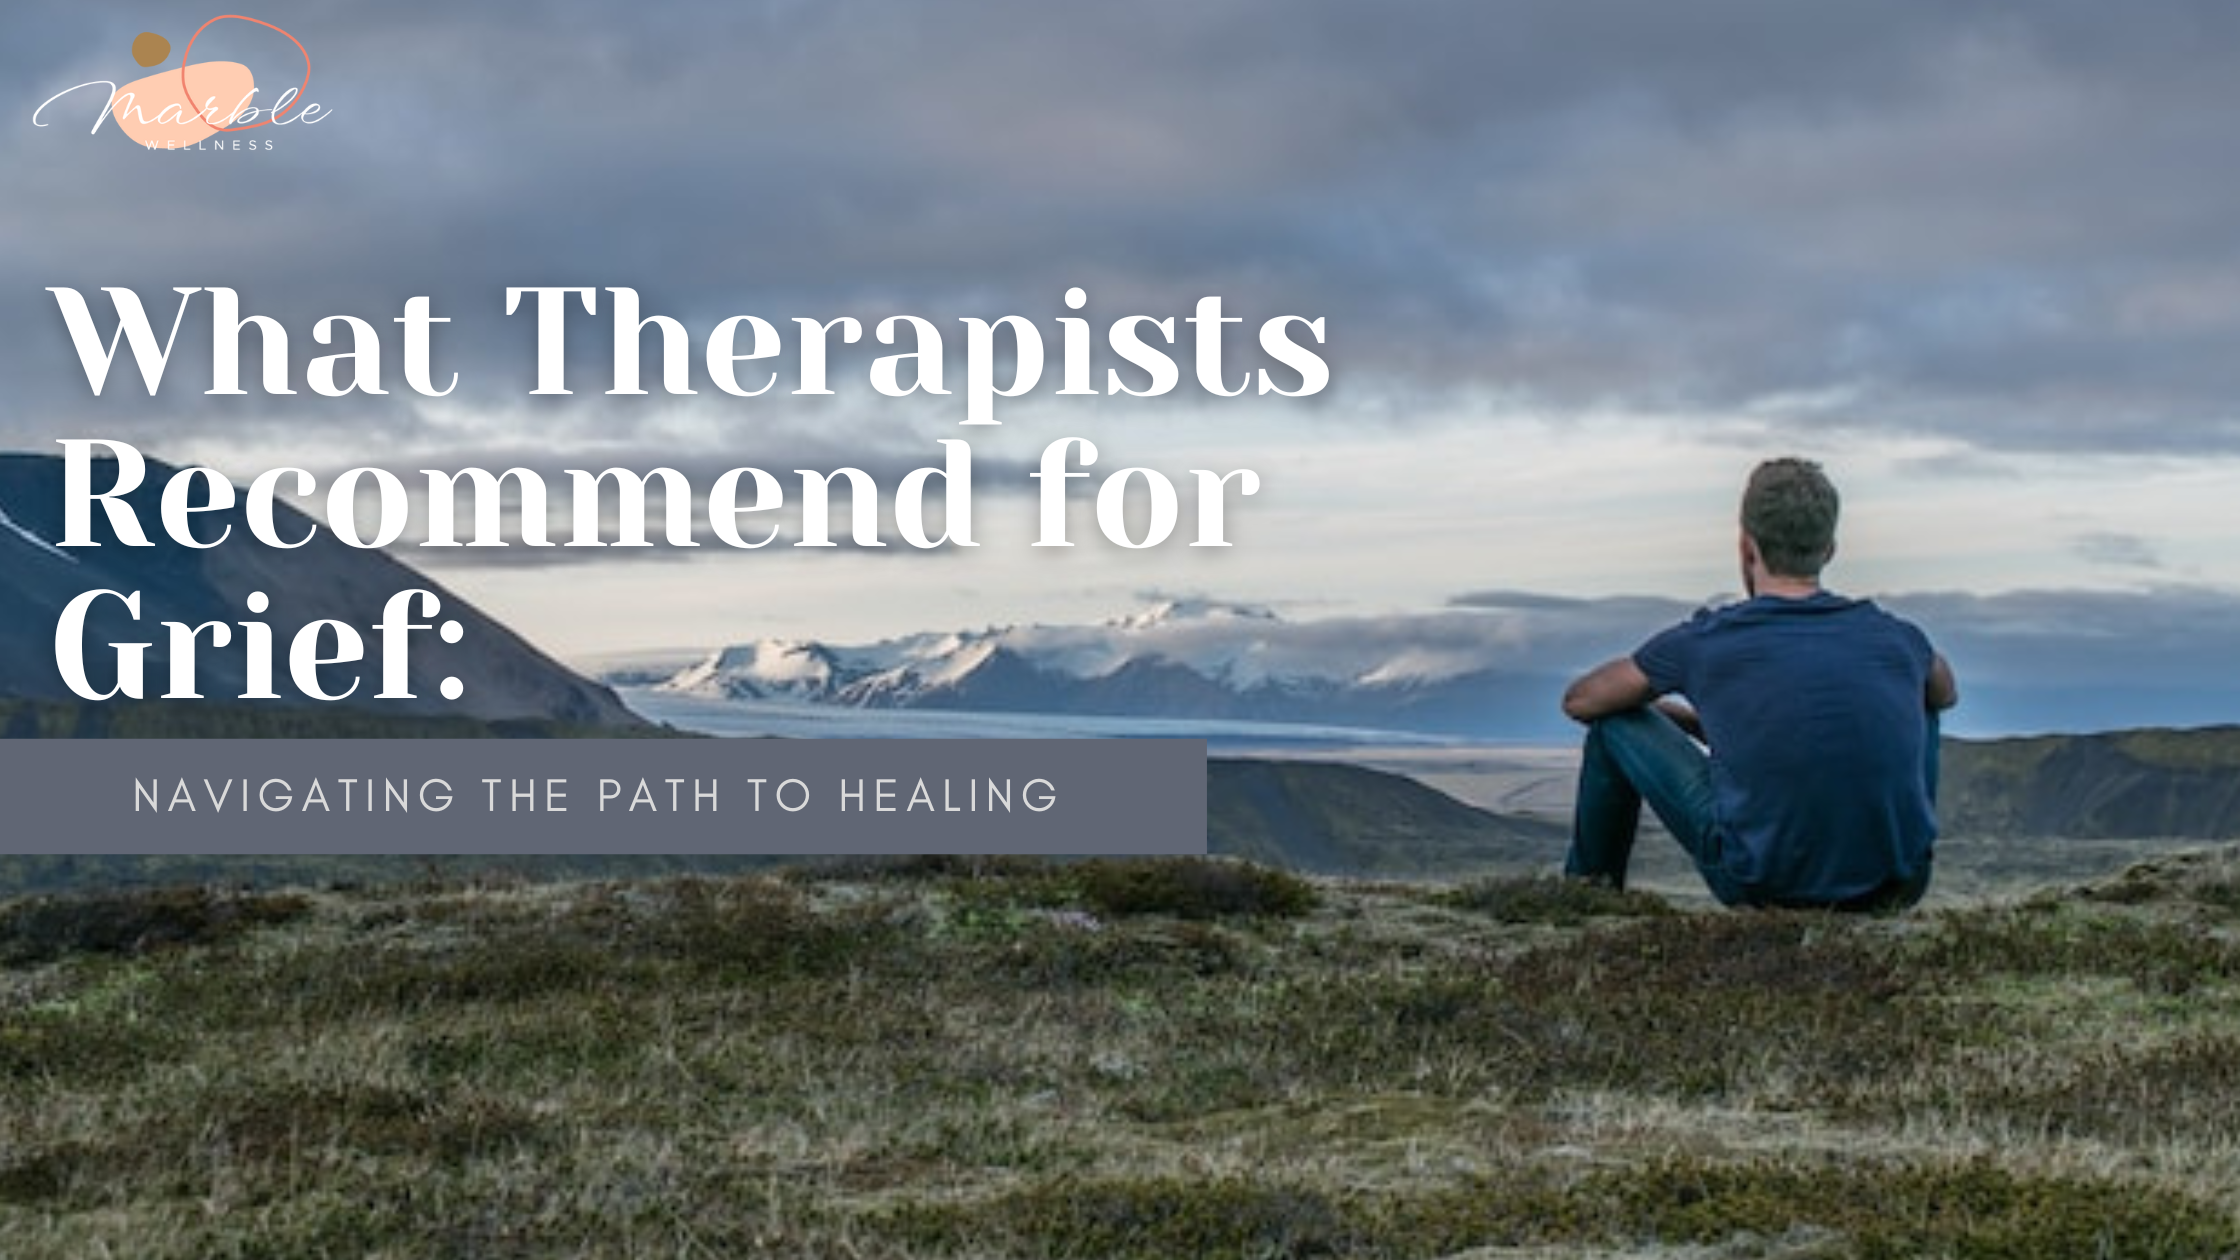 What Therapists Recommend for Healing from Grief